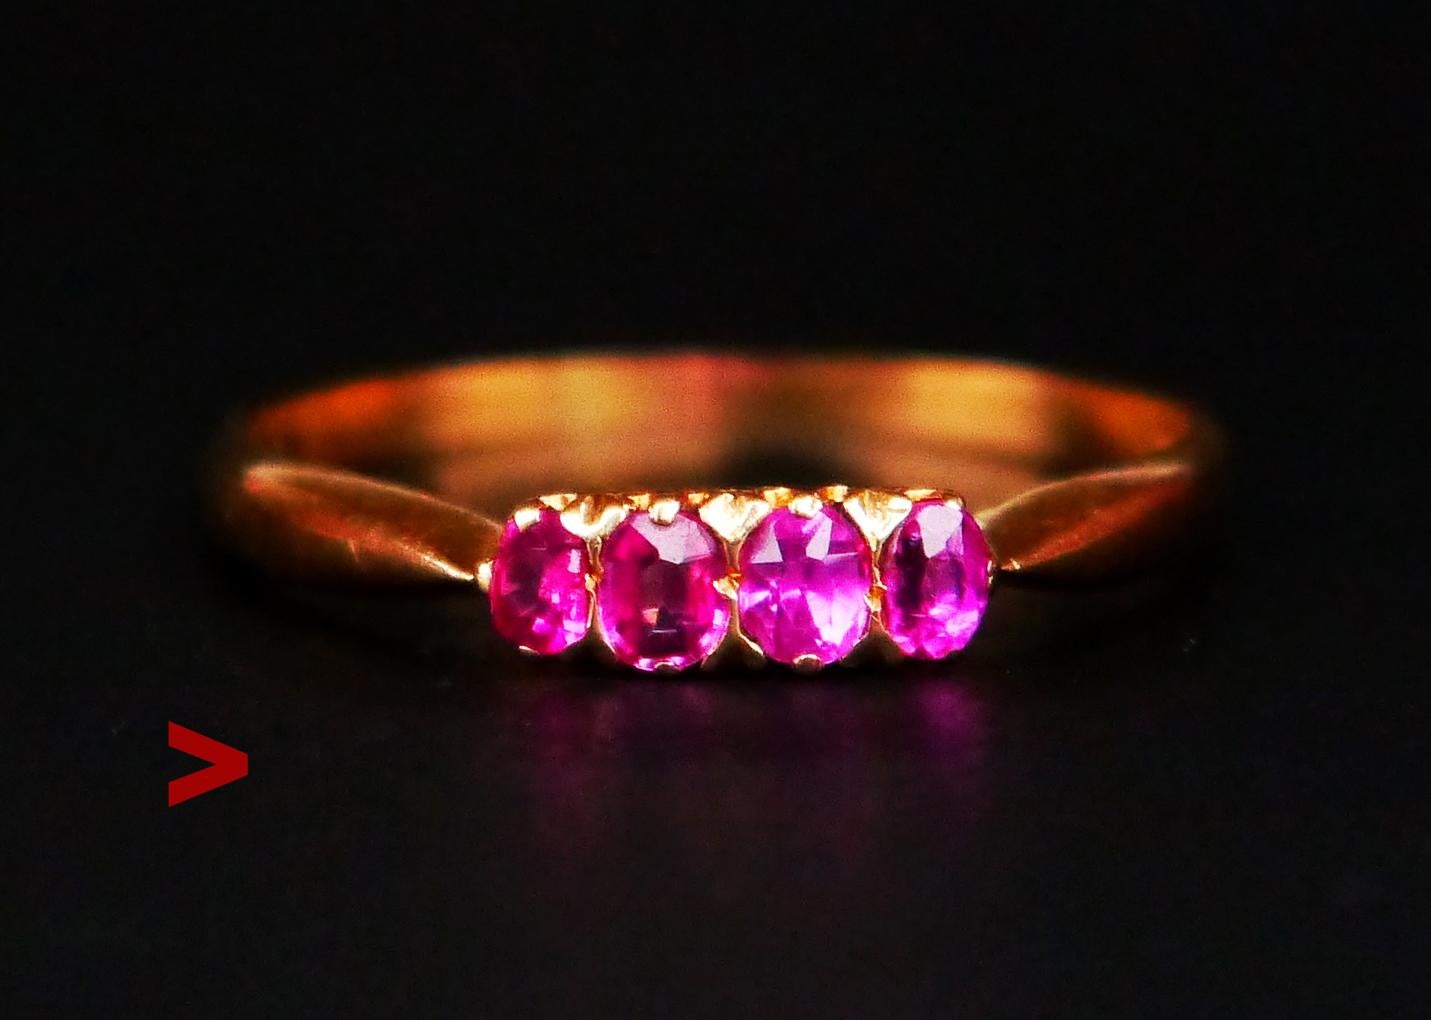 Antique Ring featuring, band in 18K Yellow Gold, 4 natural pinky red rubies, made ca.1900 s -1930s.

Hallmarked 18 ct. No hallmarks of the maker.

The crown part with stones is 10 mm wide. Two central stones 3 mm x 2.55 mm /0.15 ct each, 2 on flanks